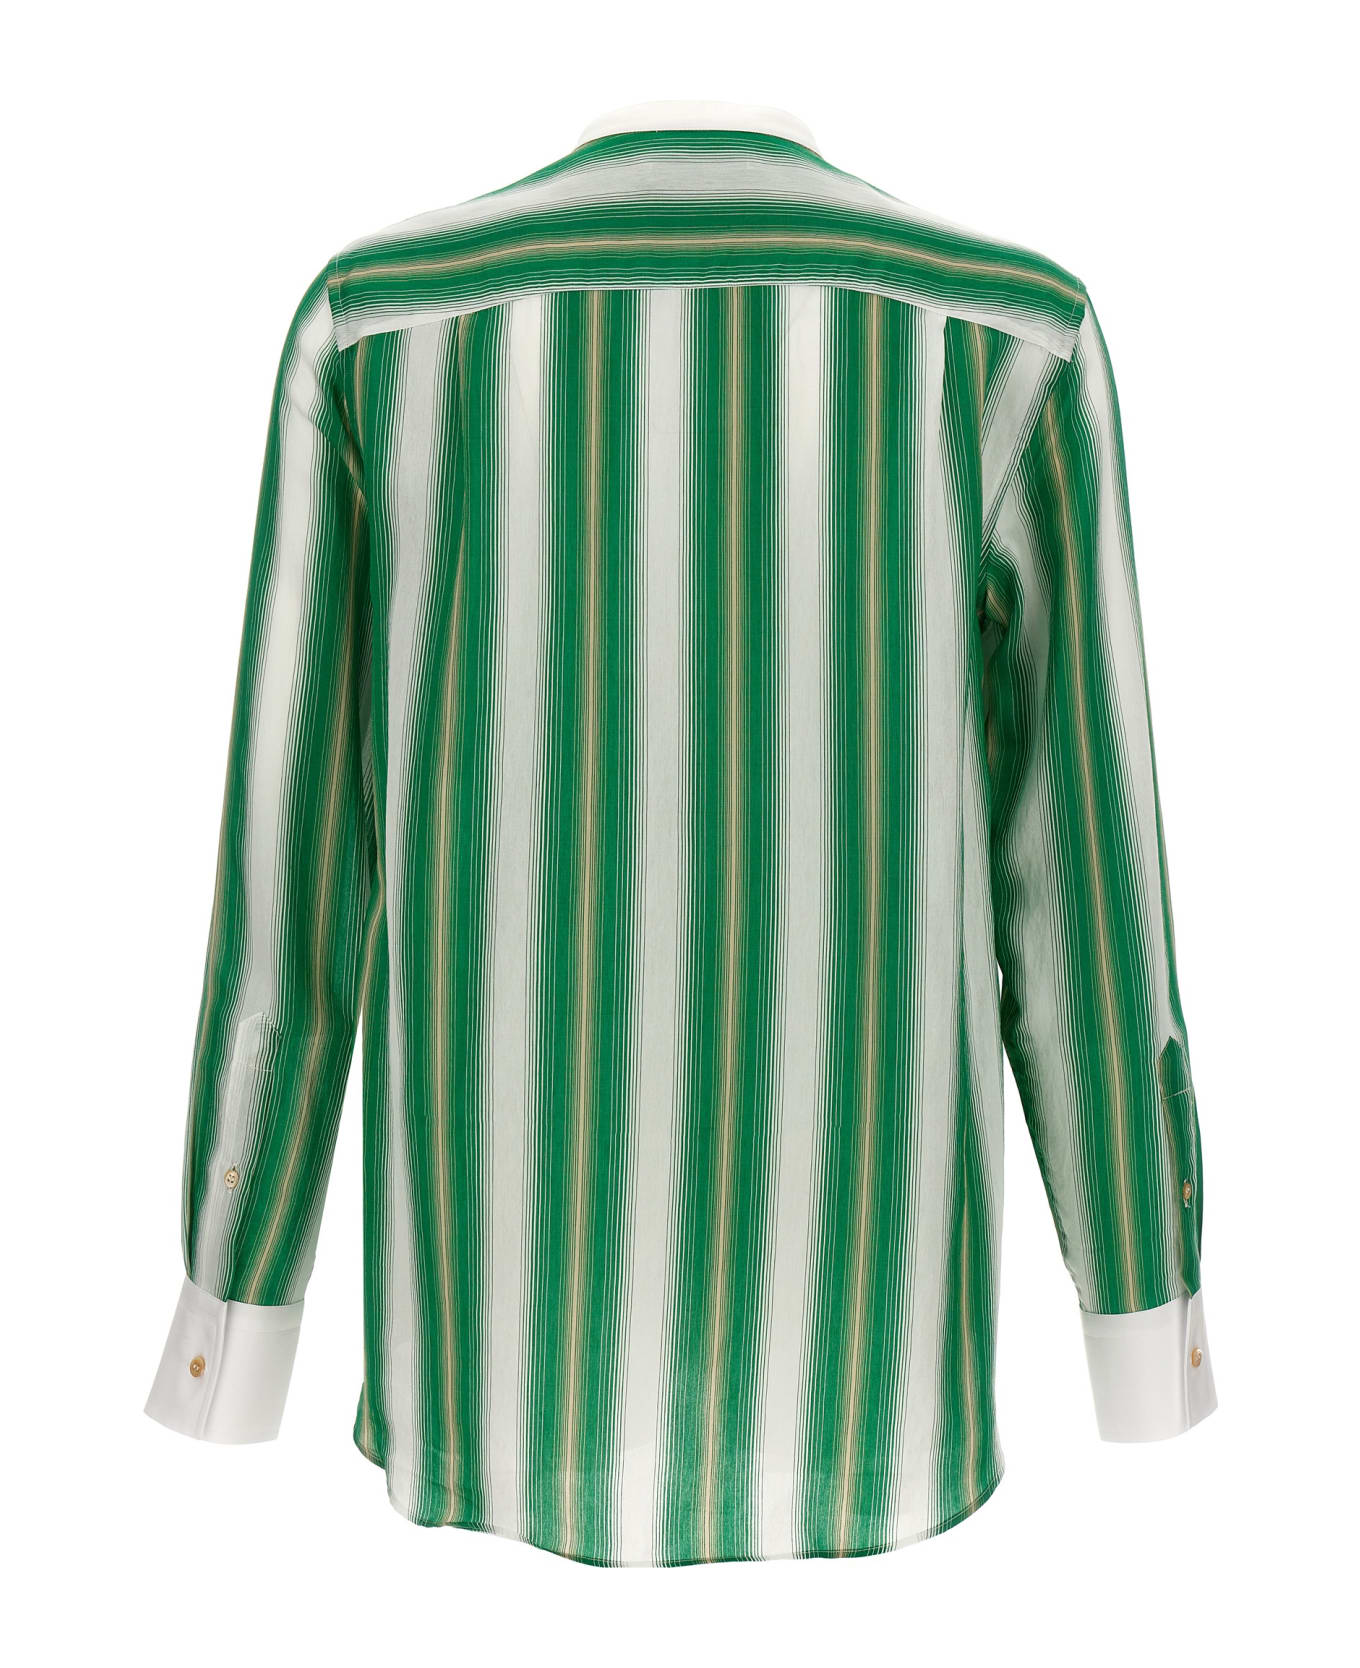 Wales Bonner 'cadence' Shirt - 0070 GREEN AND IVORY